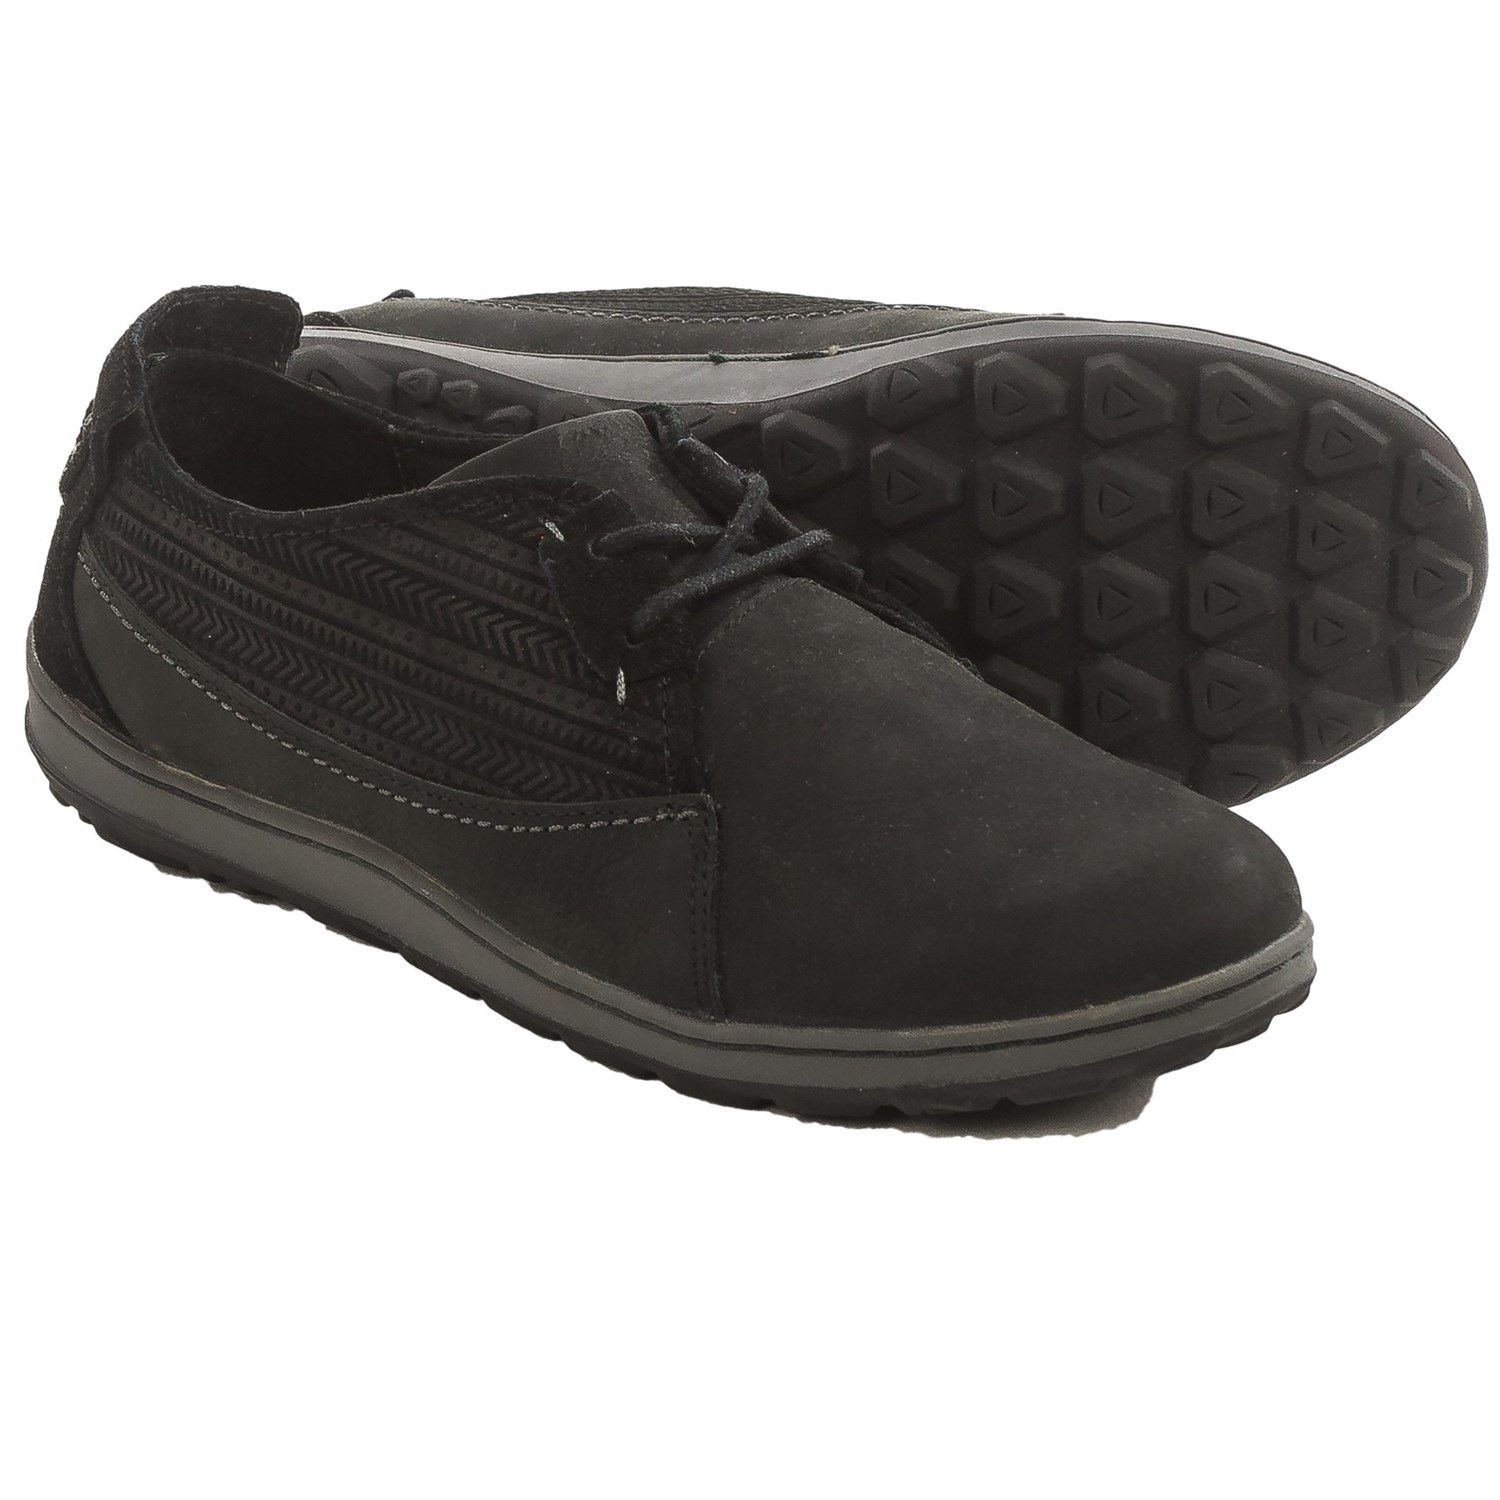 Merrell Ashland Lace Shoes (For Women) - Save 50%